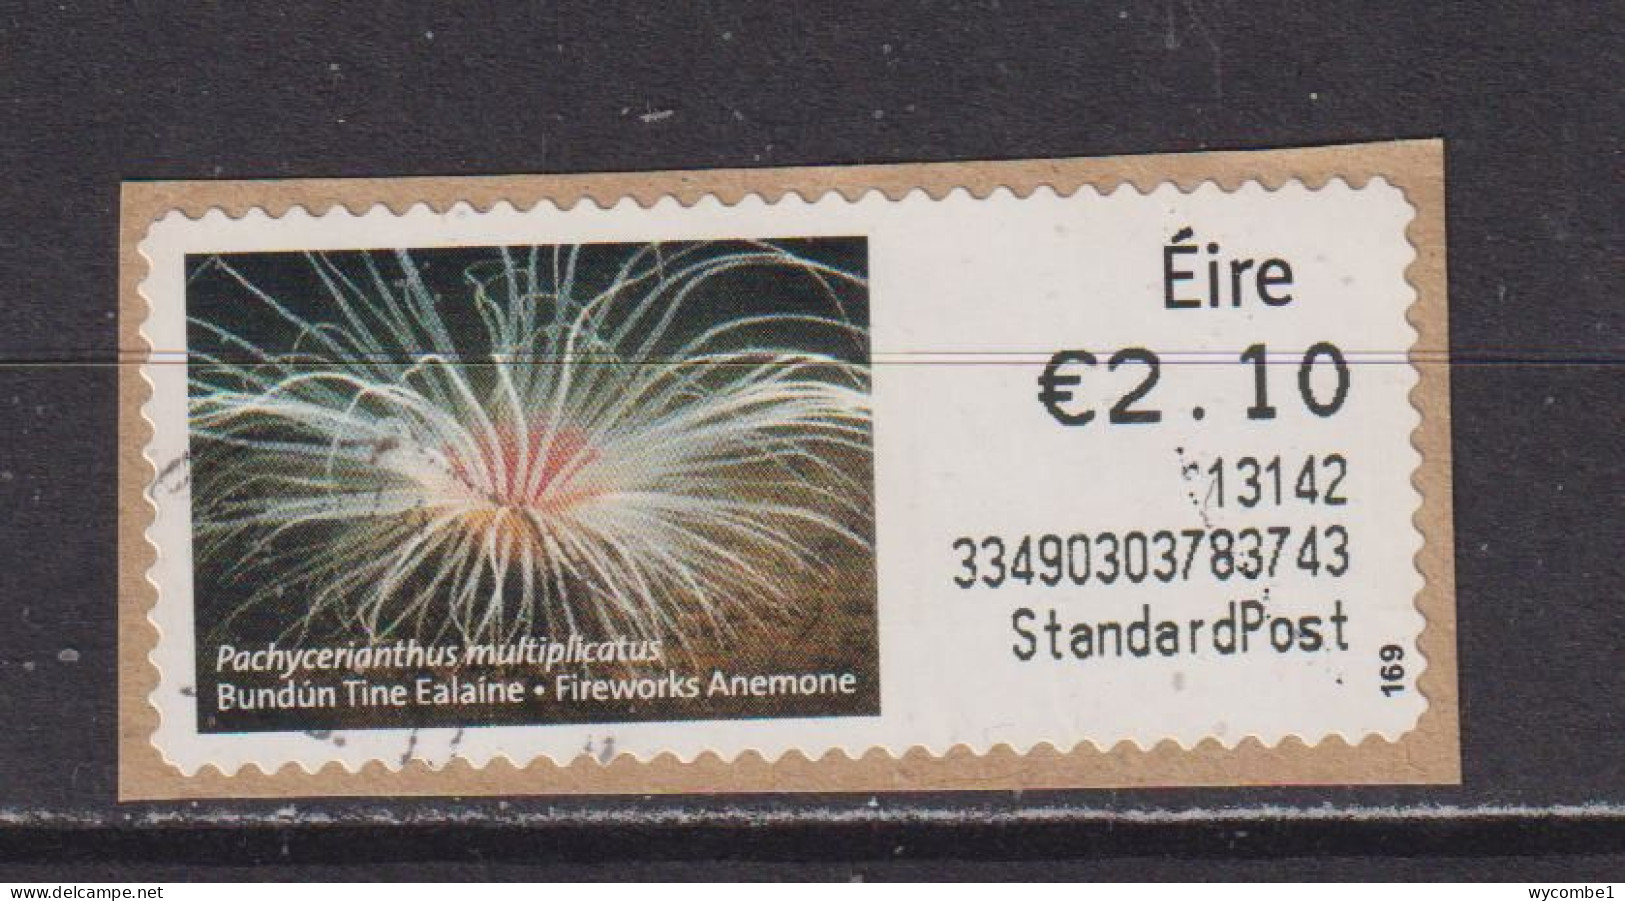 IRELAND  -  2012 Fireworks Anemone SOAR (Stamp On A Roll)  CDS  Used On Piece As Scan - Used Stamps